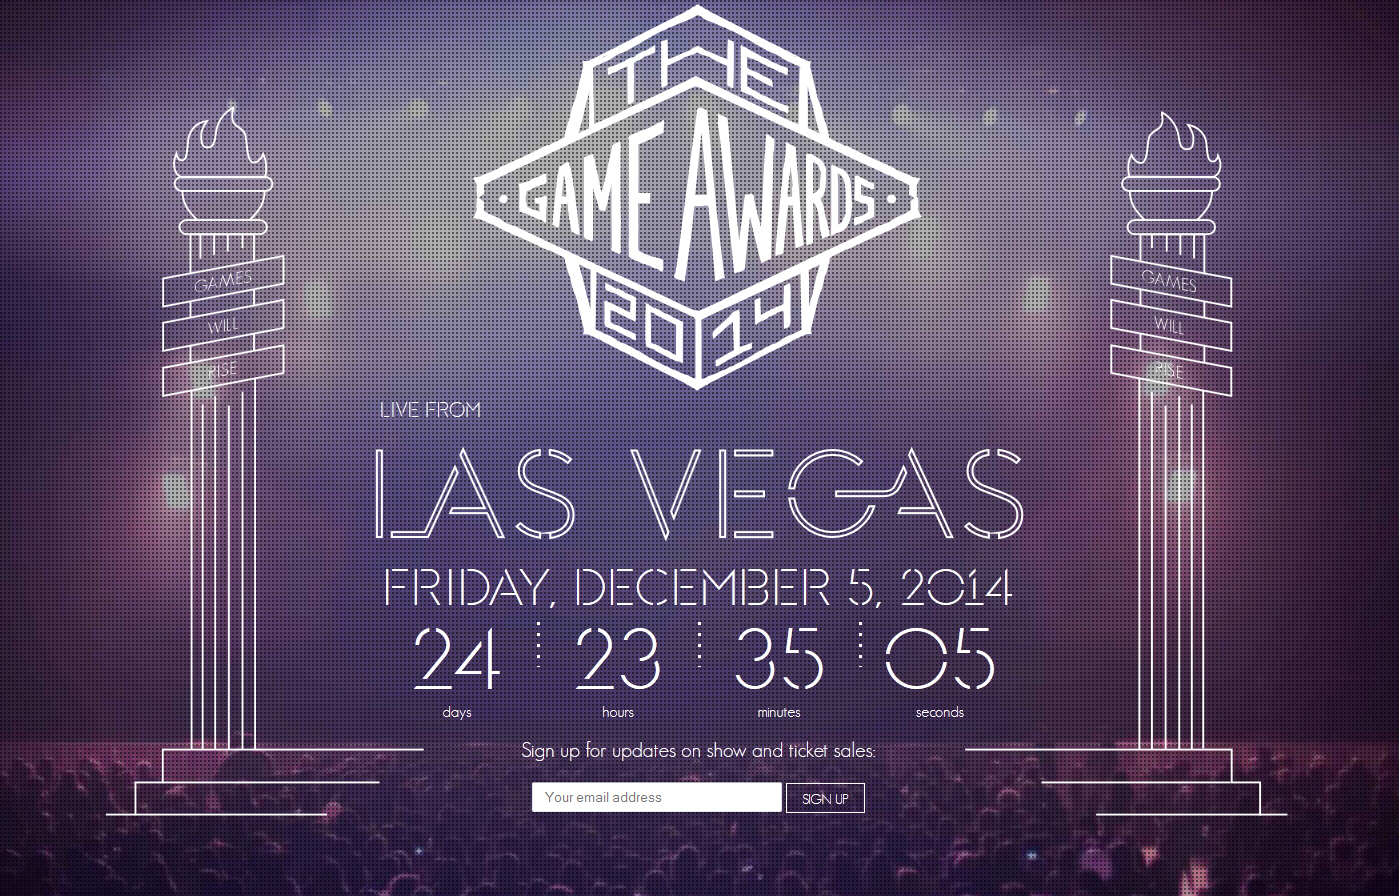 the-game-awards-2014 ex vgx